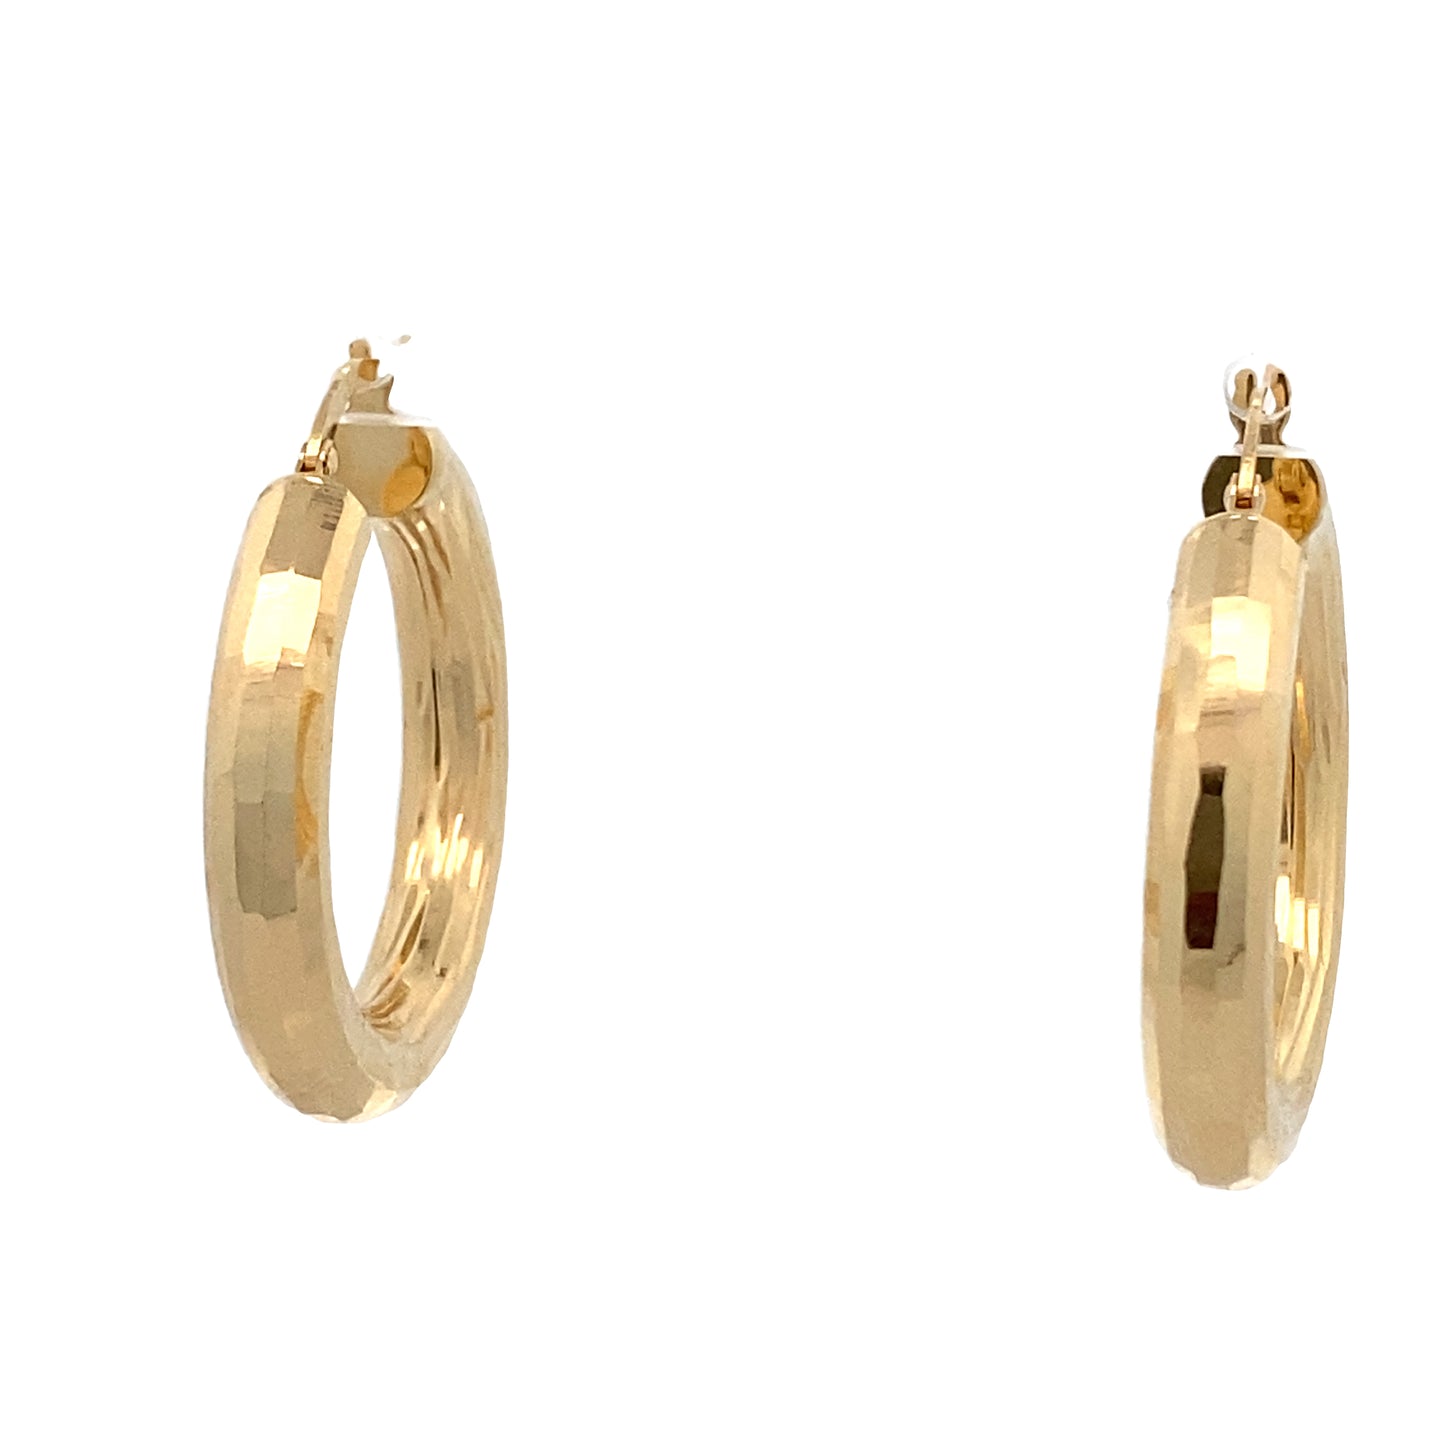 14K Gold Faceted Bold Hoops Earrings | Luby Gold Collection | Luby 